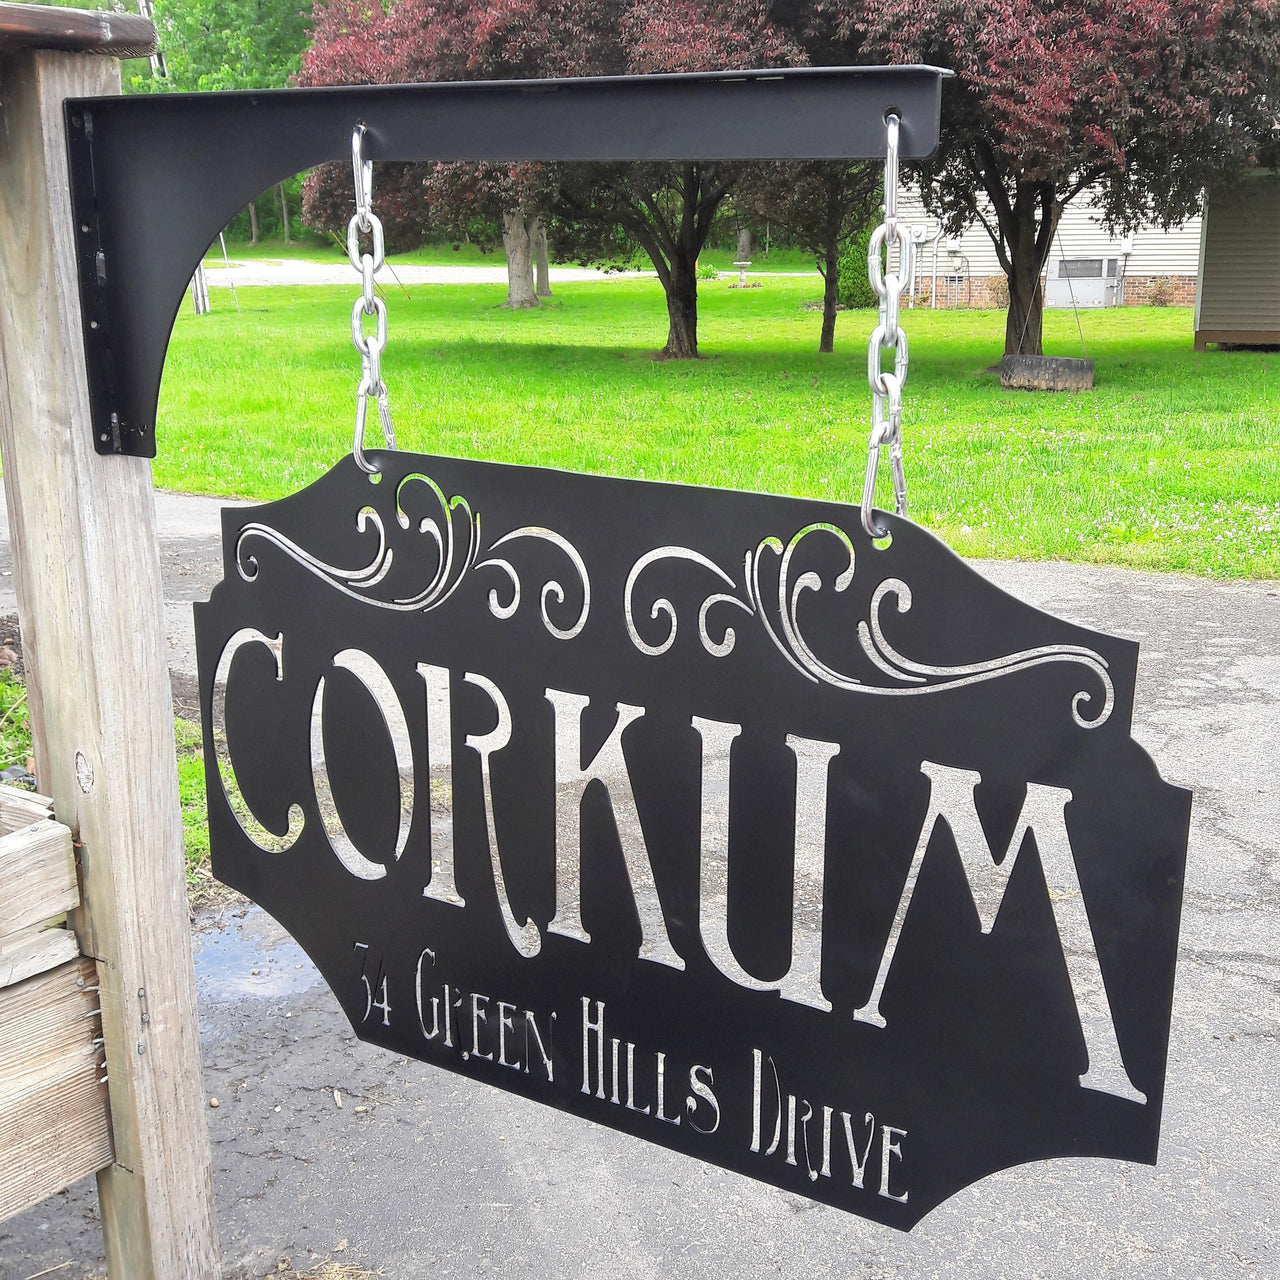 This custom metal sign is Powdercoated and comes with a matching hanging post, silver chain and carabiners. The hanging sign reads, "Corkum in Green Hills Drive". it is an address sign